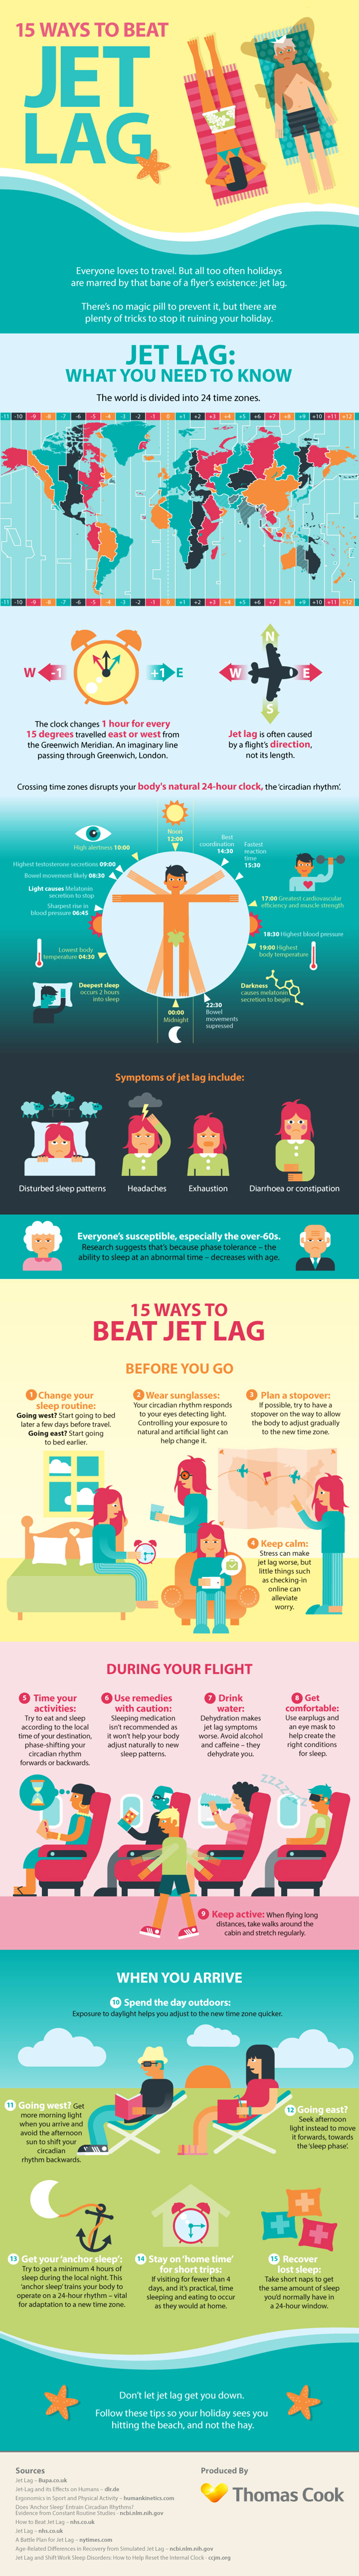 Best Way to Deal with Jet Lag Infographic